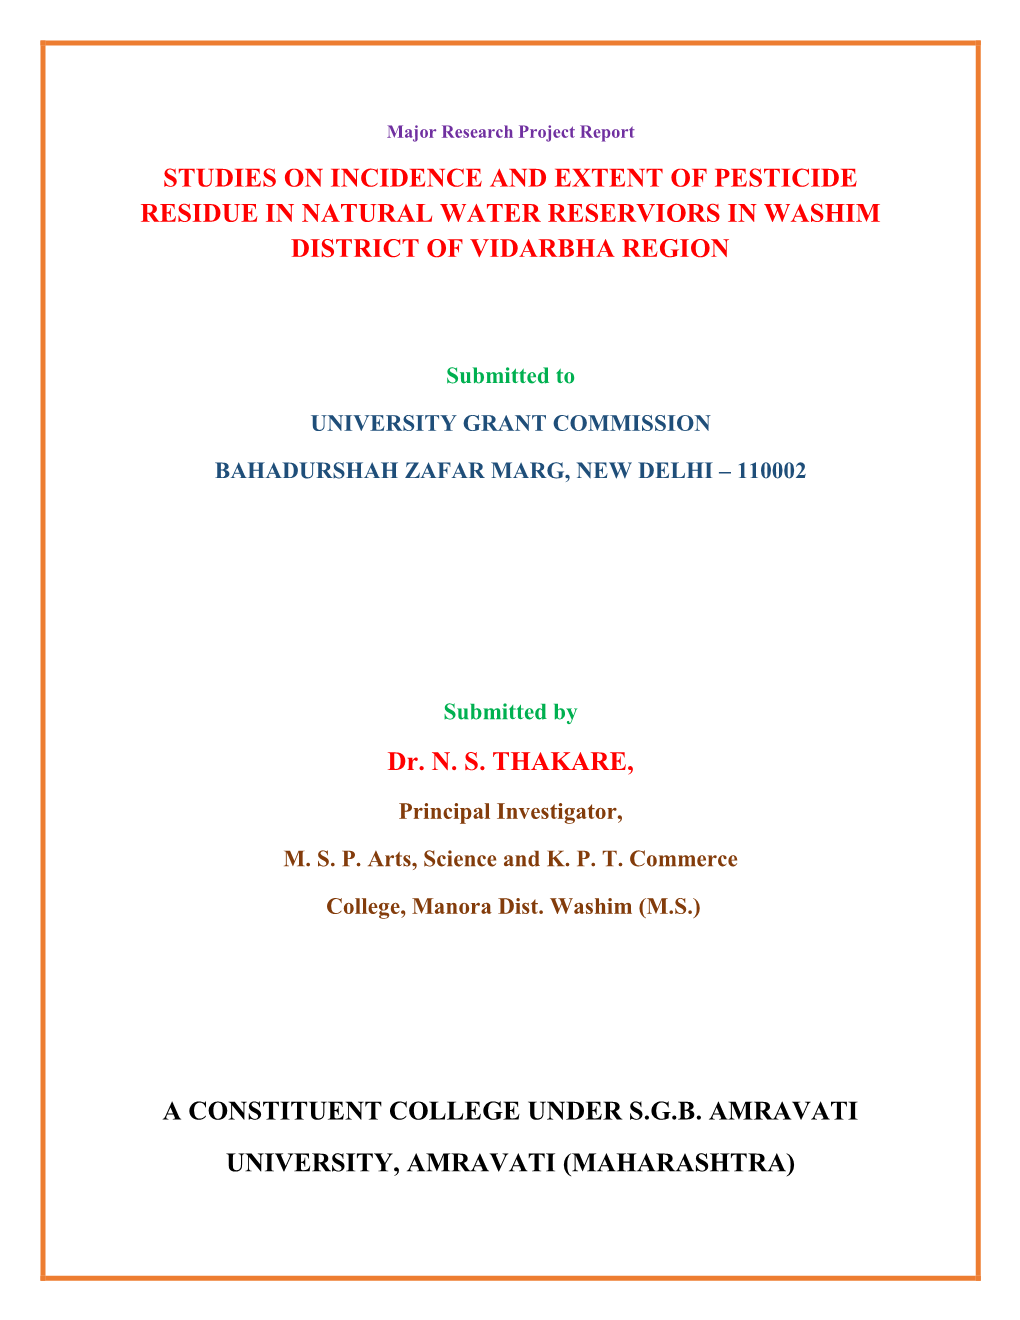 Major Research Project Report of Chemistry